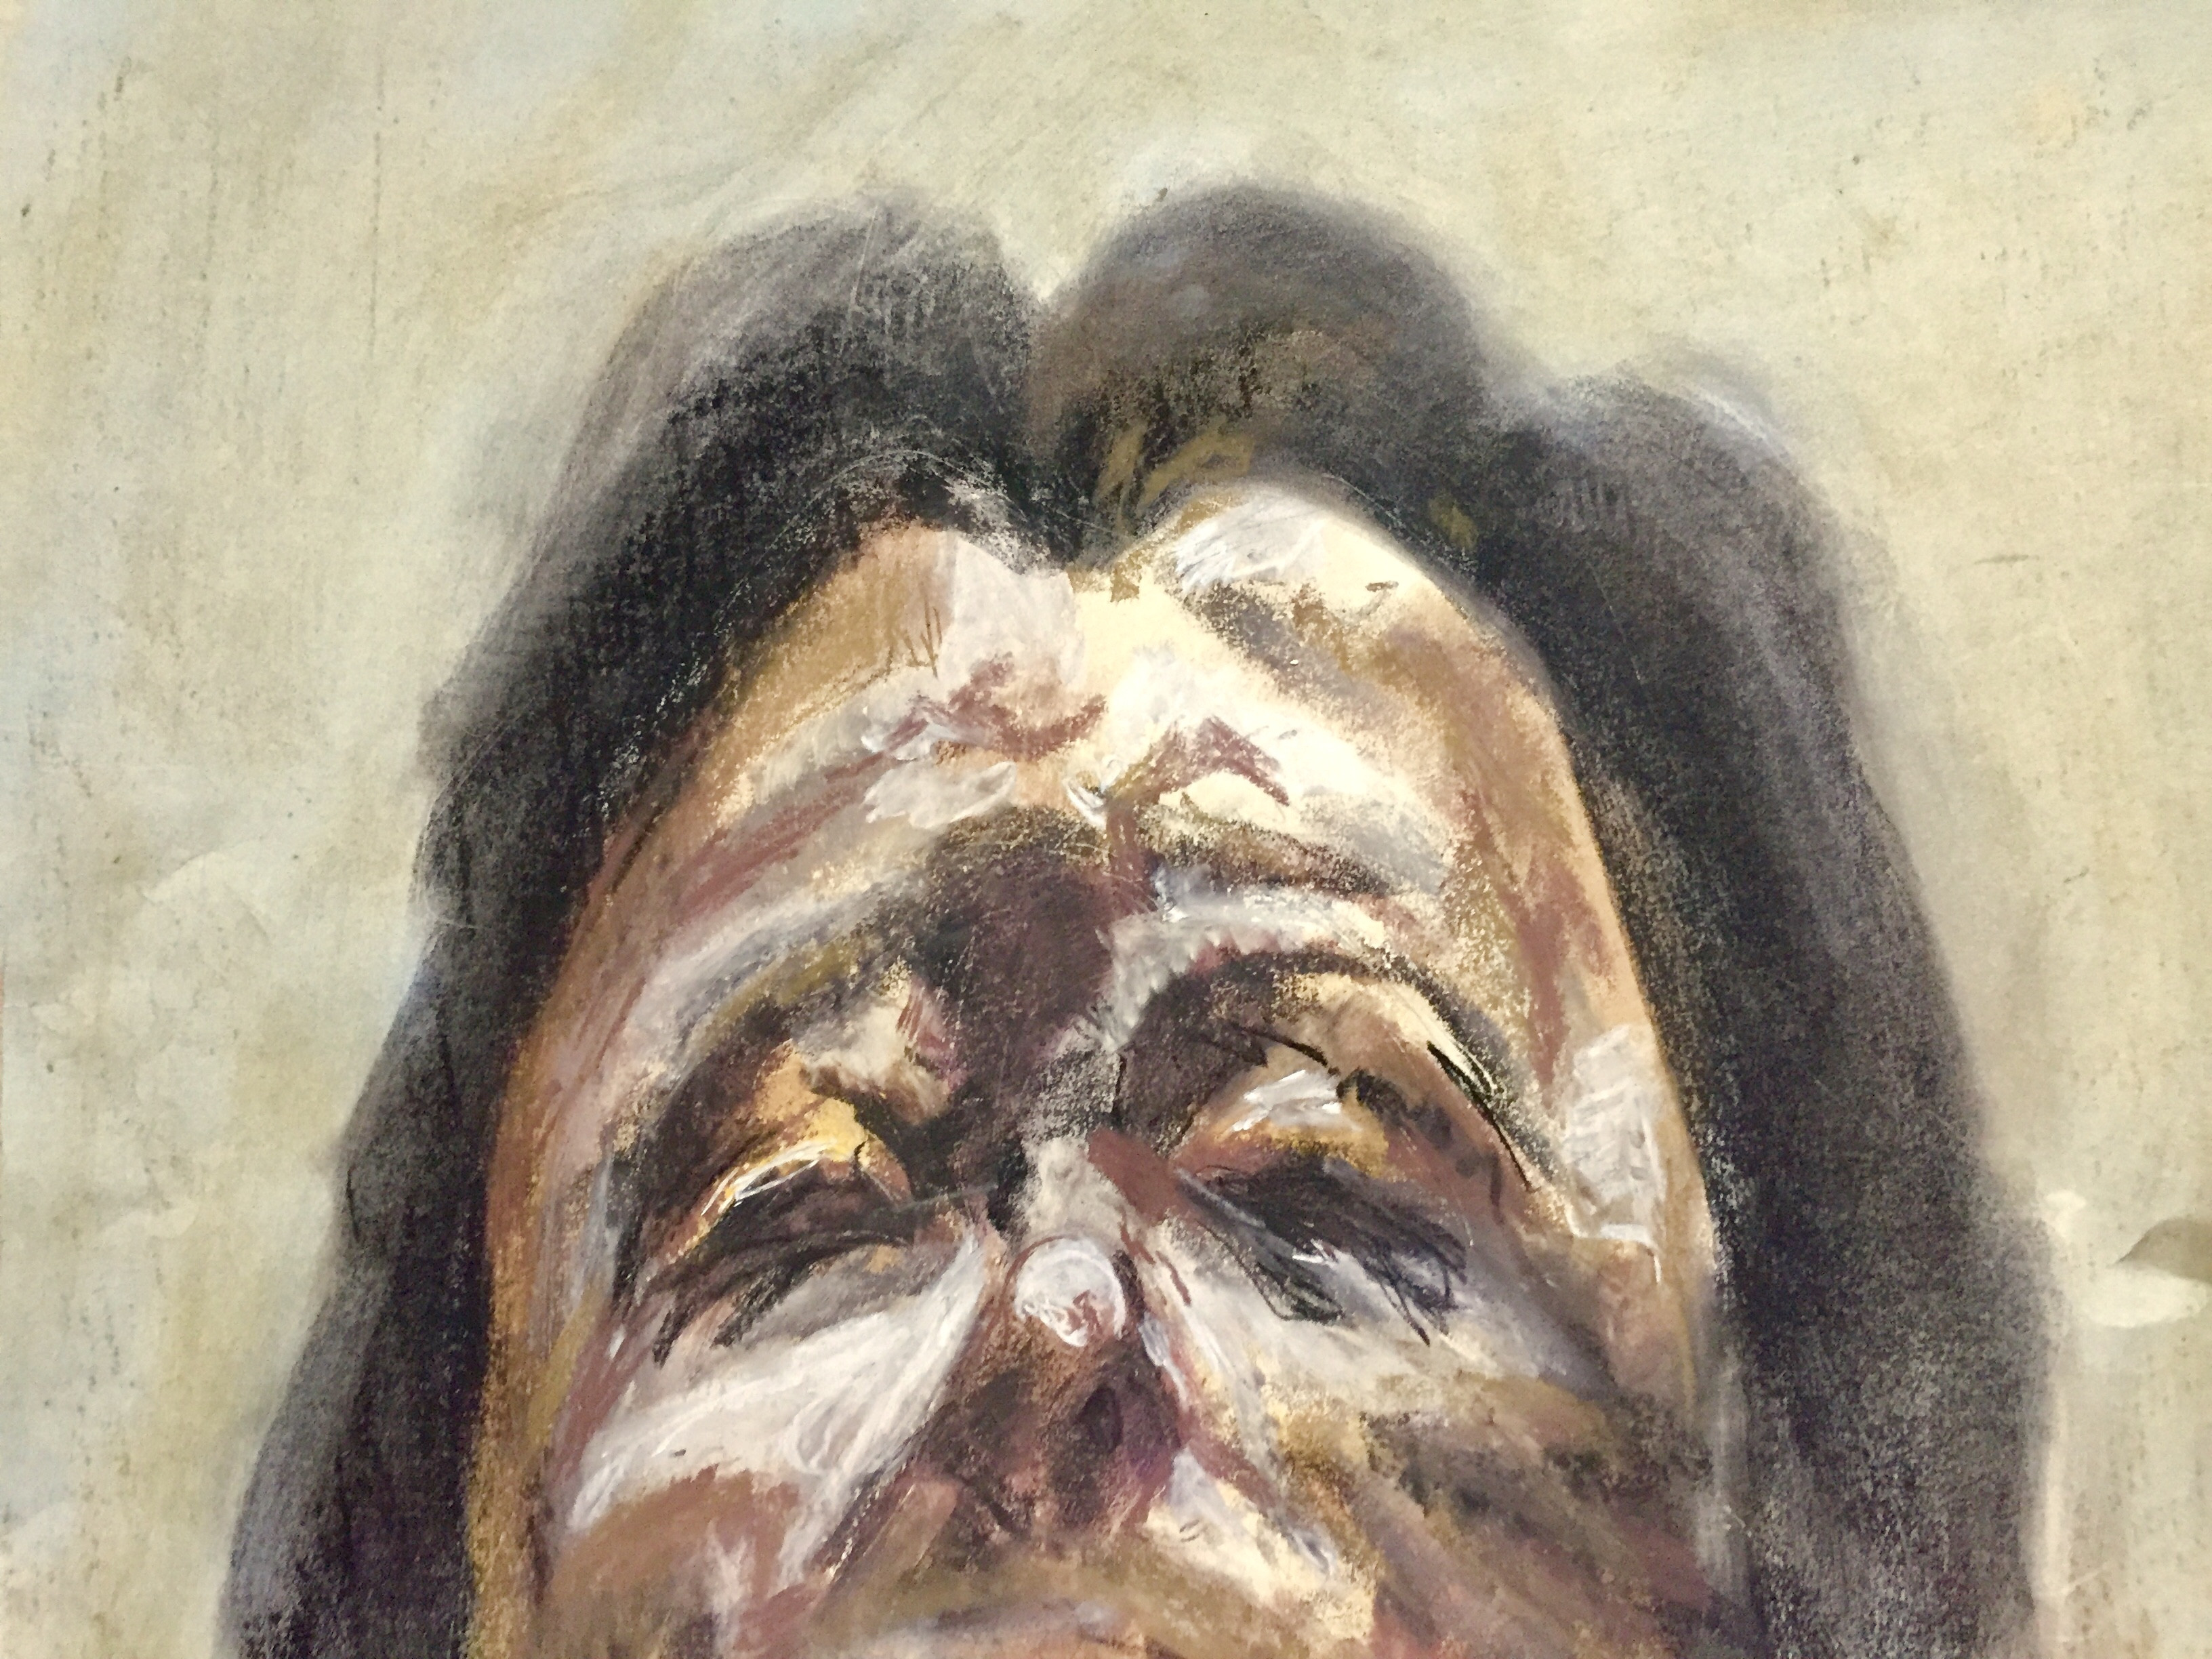 Lucian Freud master portrait study.
Pastel on Strathmore drawing paper.